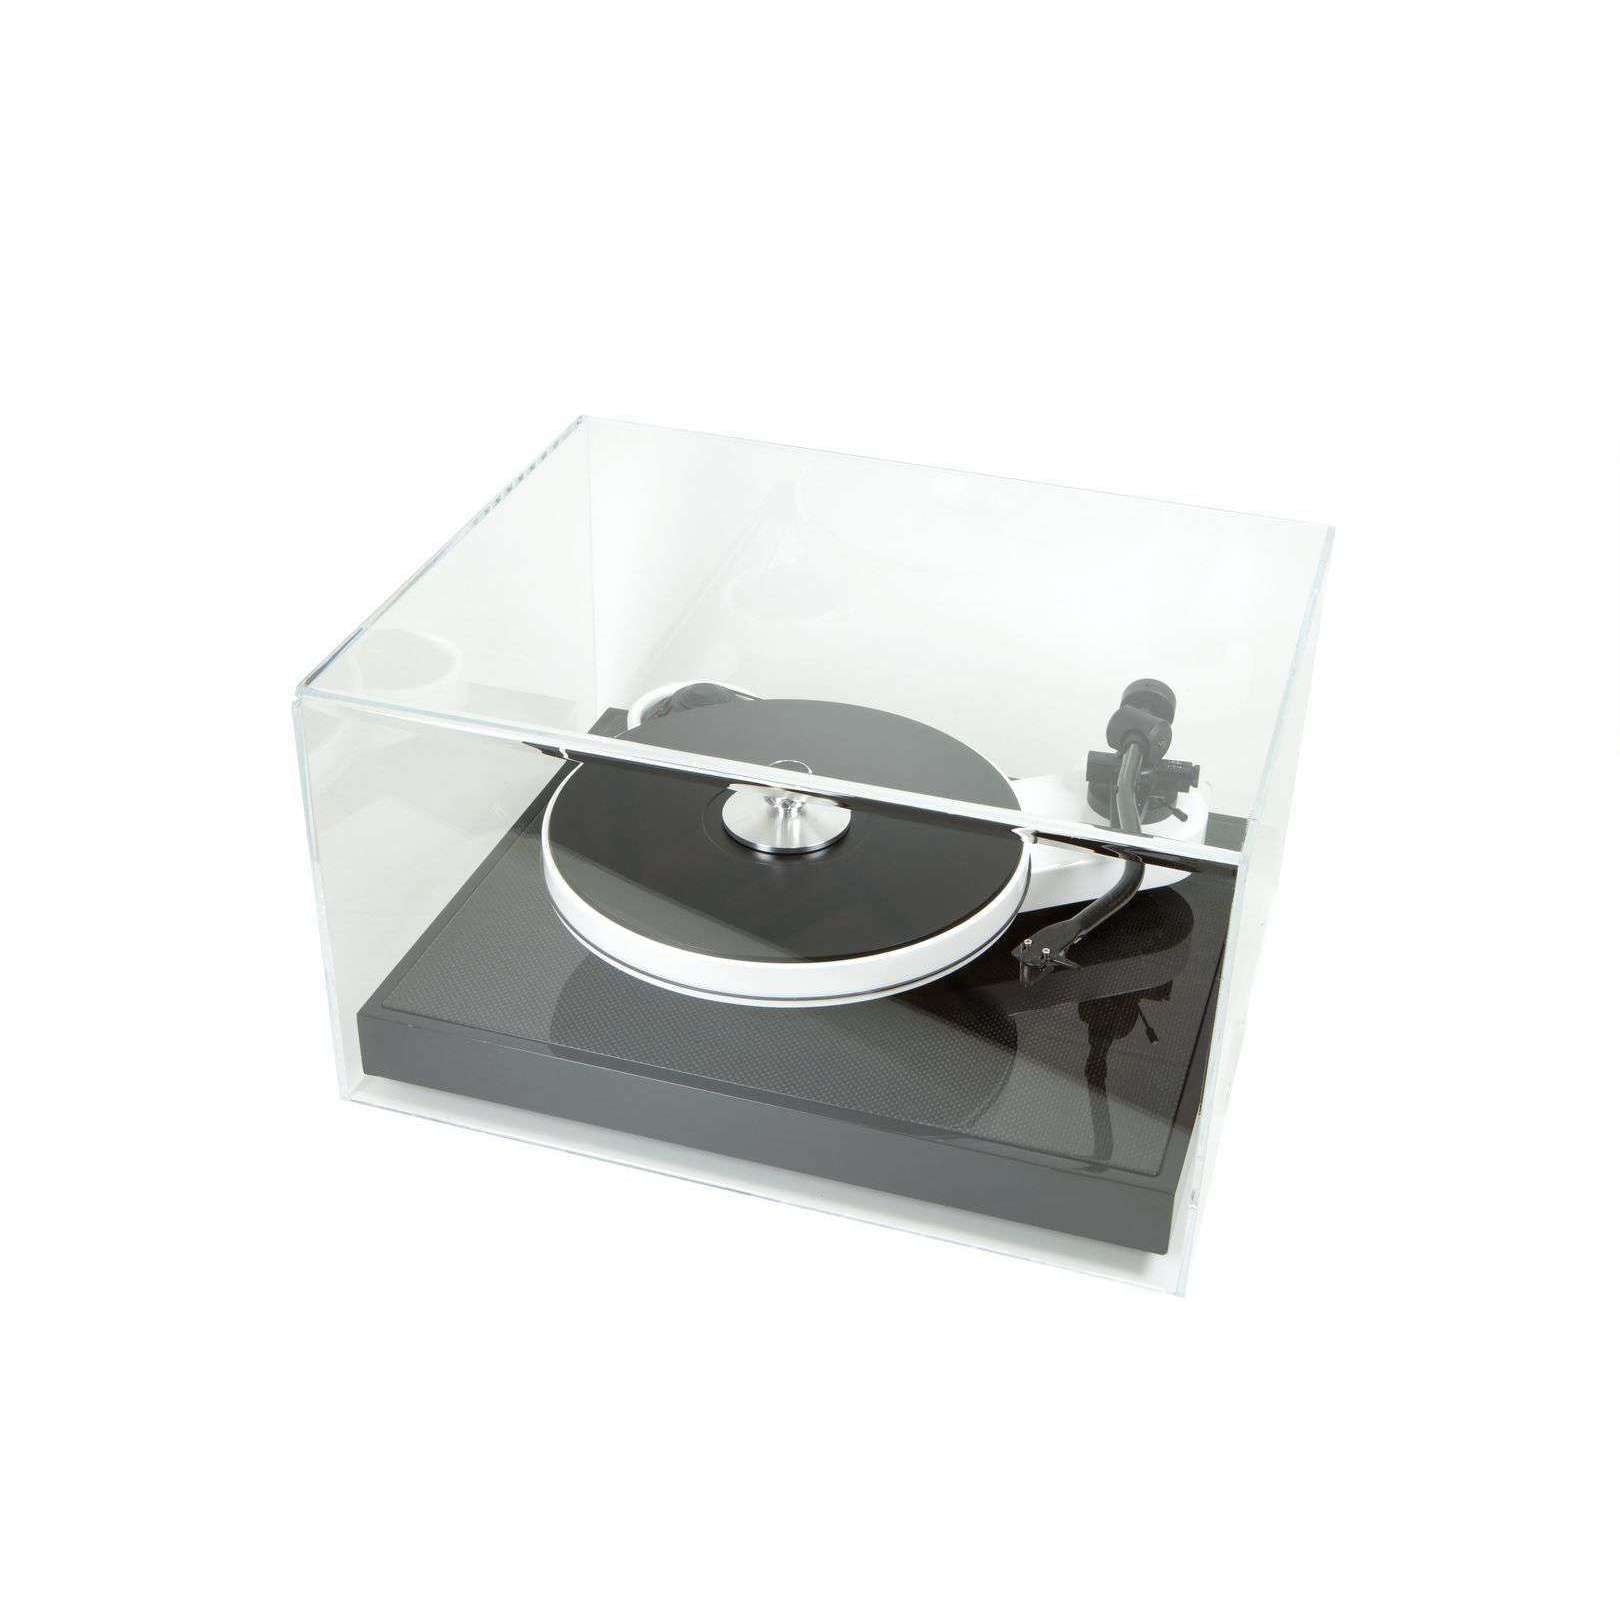 Pro-Ject Ground It Carbon (2116076961841)